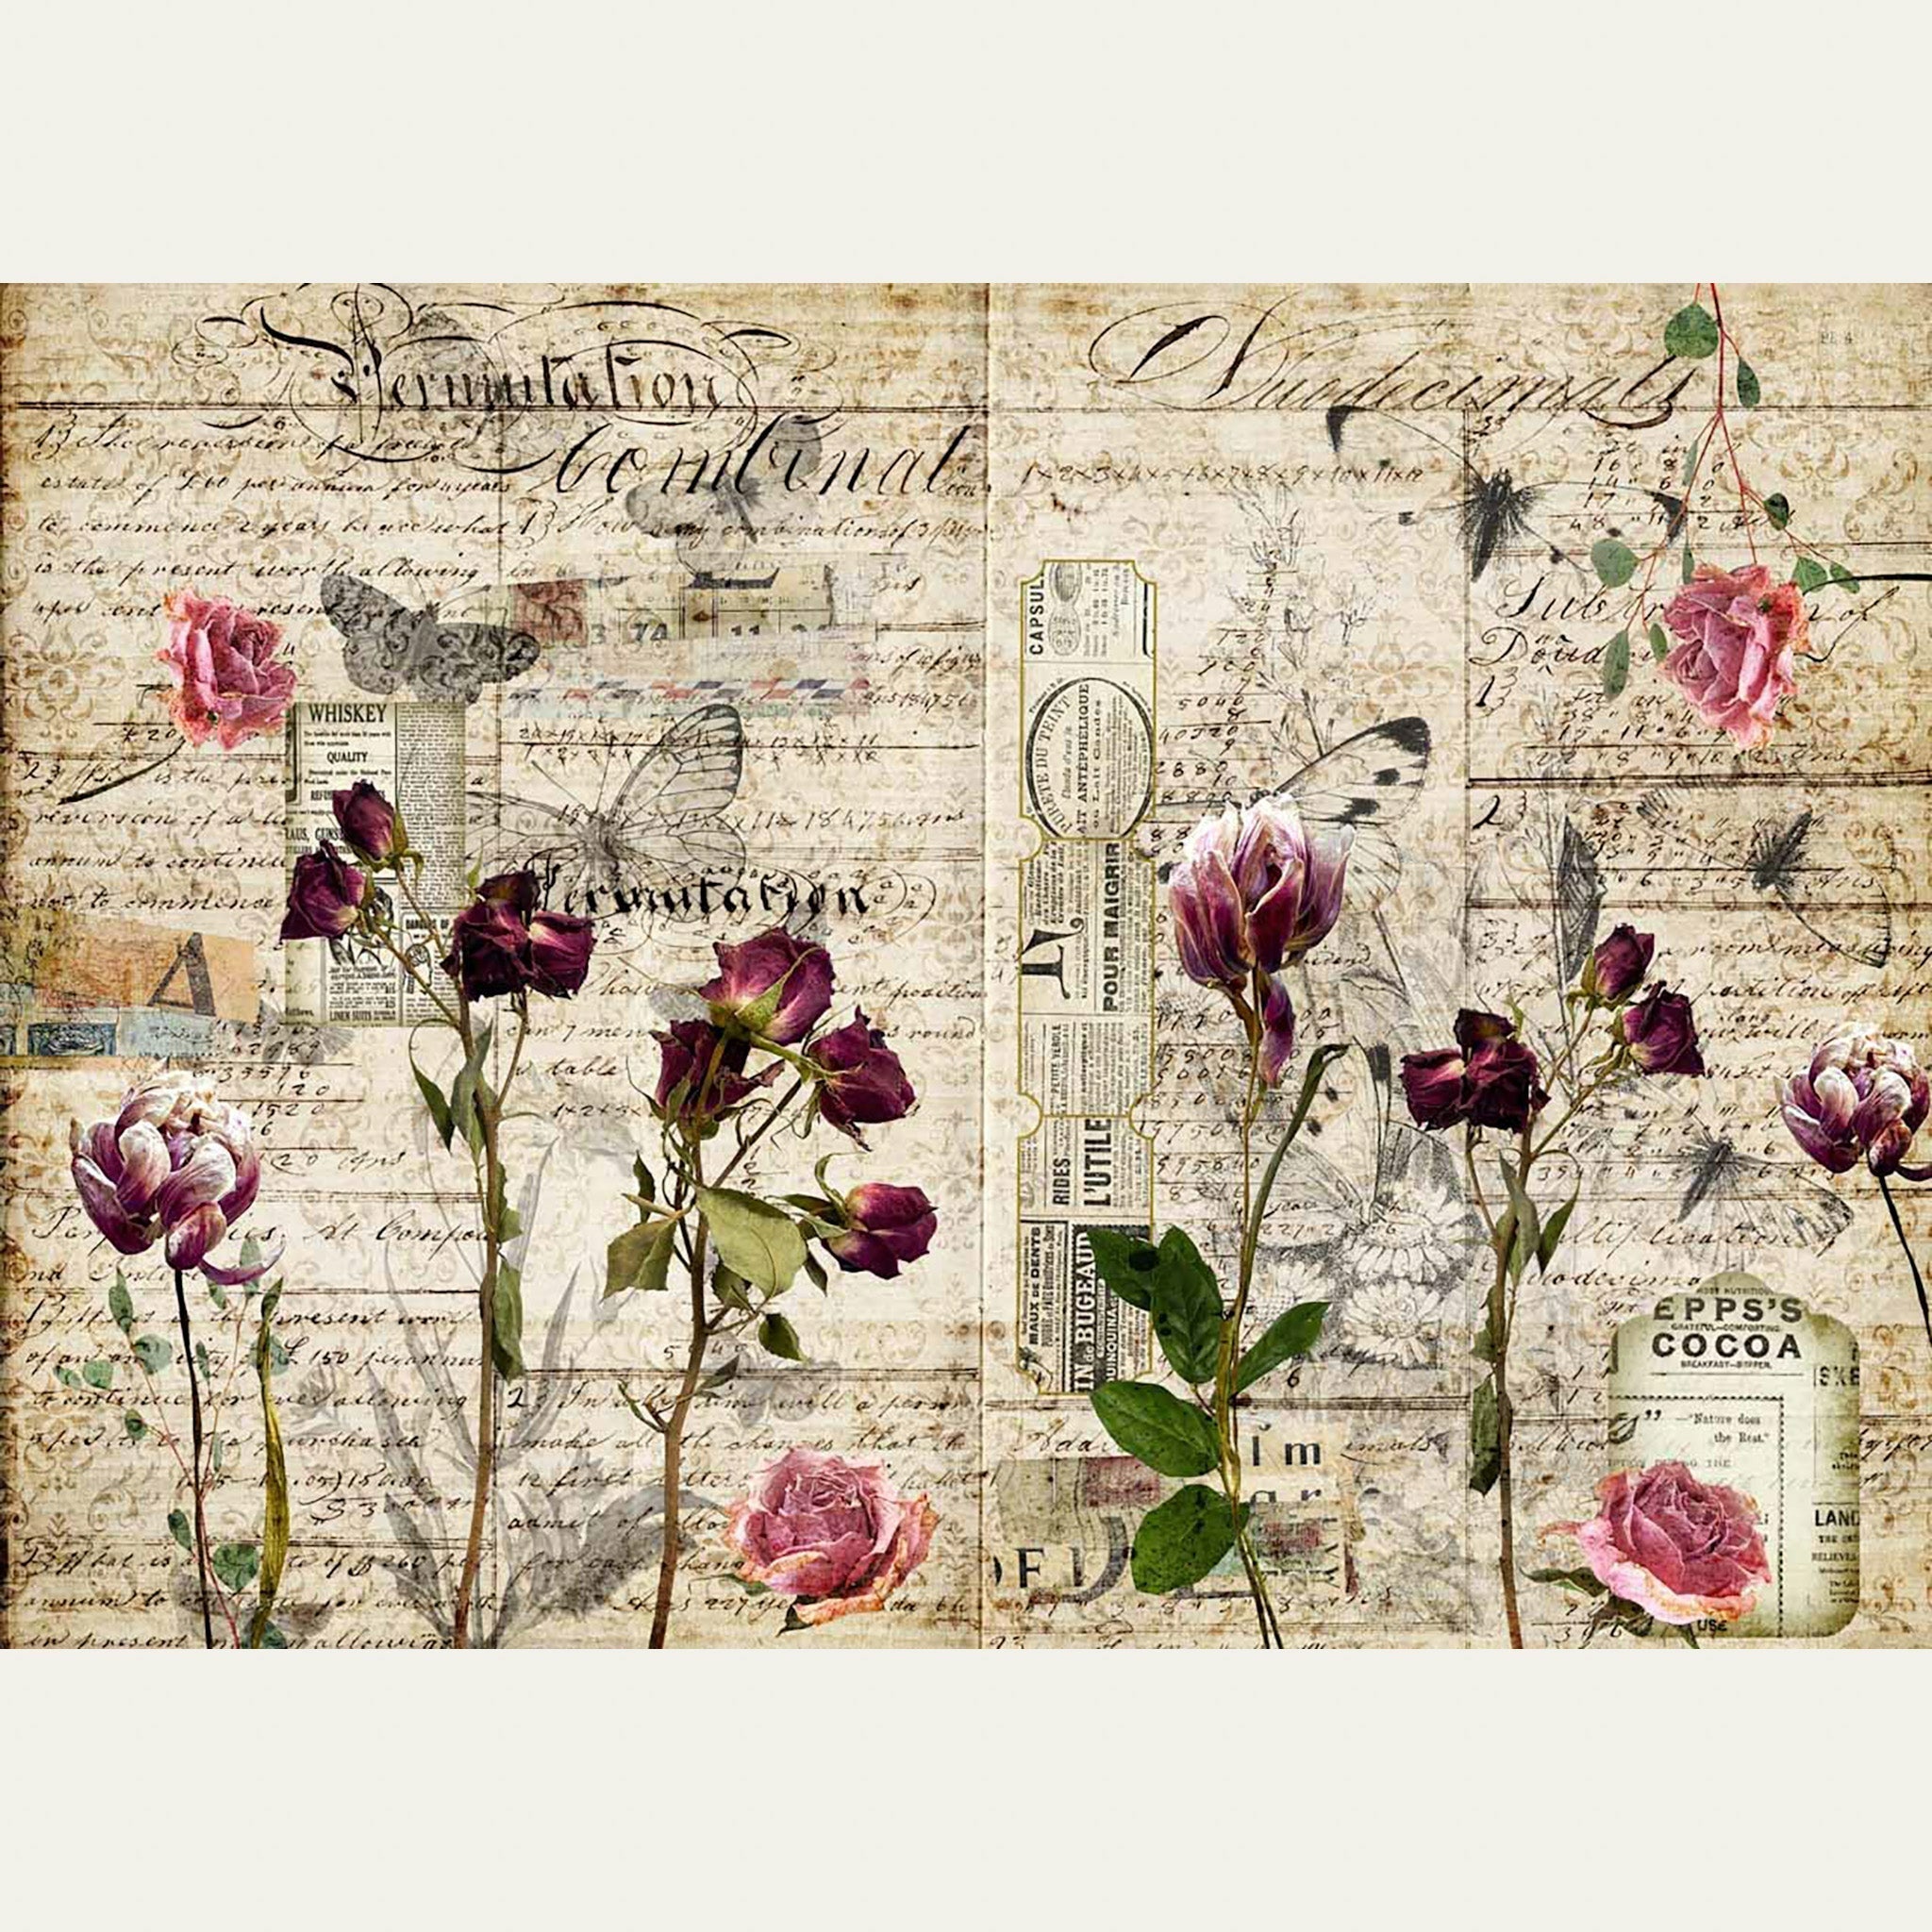 A4 rice paper design of pressed flowers against a collage of vintage magazine clippings and letters. White borders are on the top and bottom.